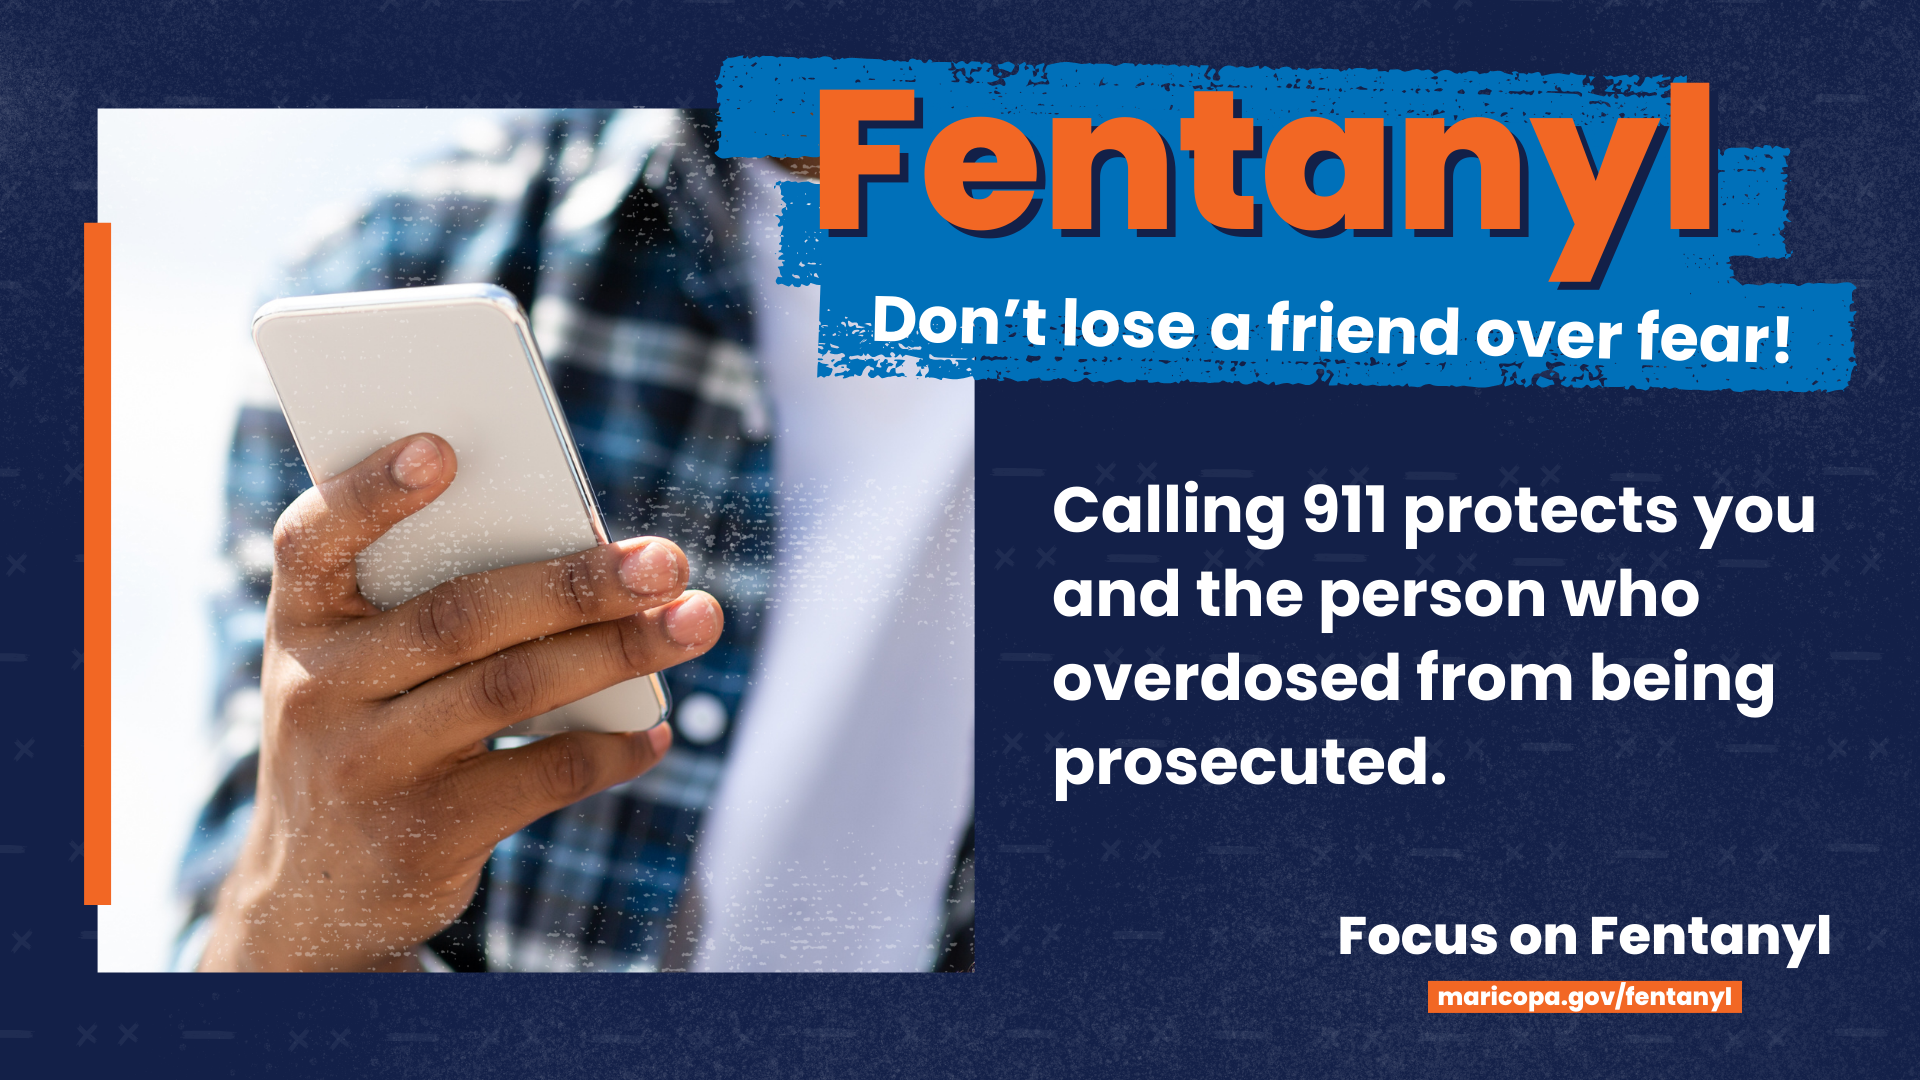 Good Sam Law Protects you and the person who overdosed from being prosecuted, call 911!